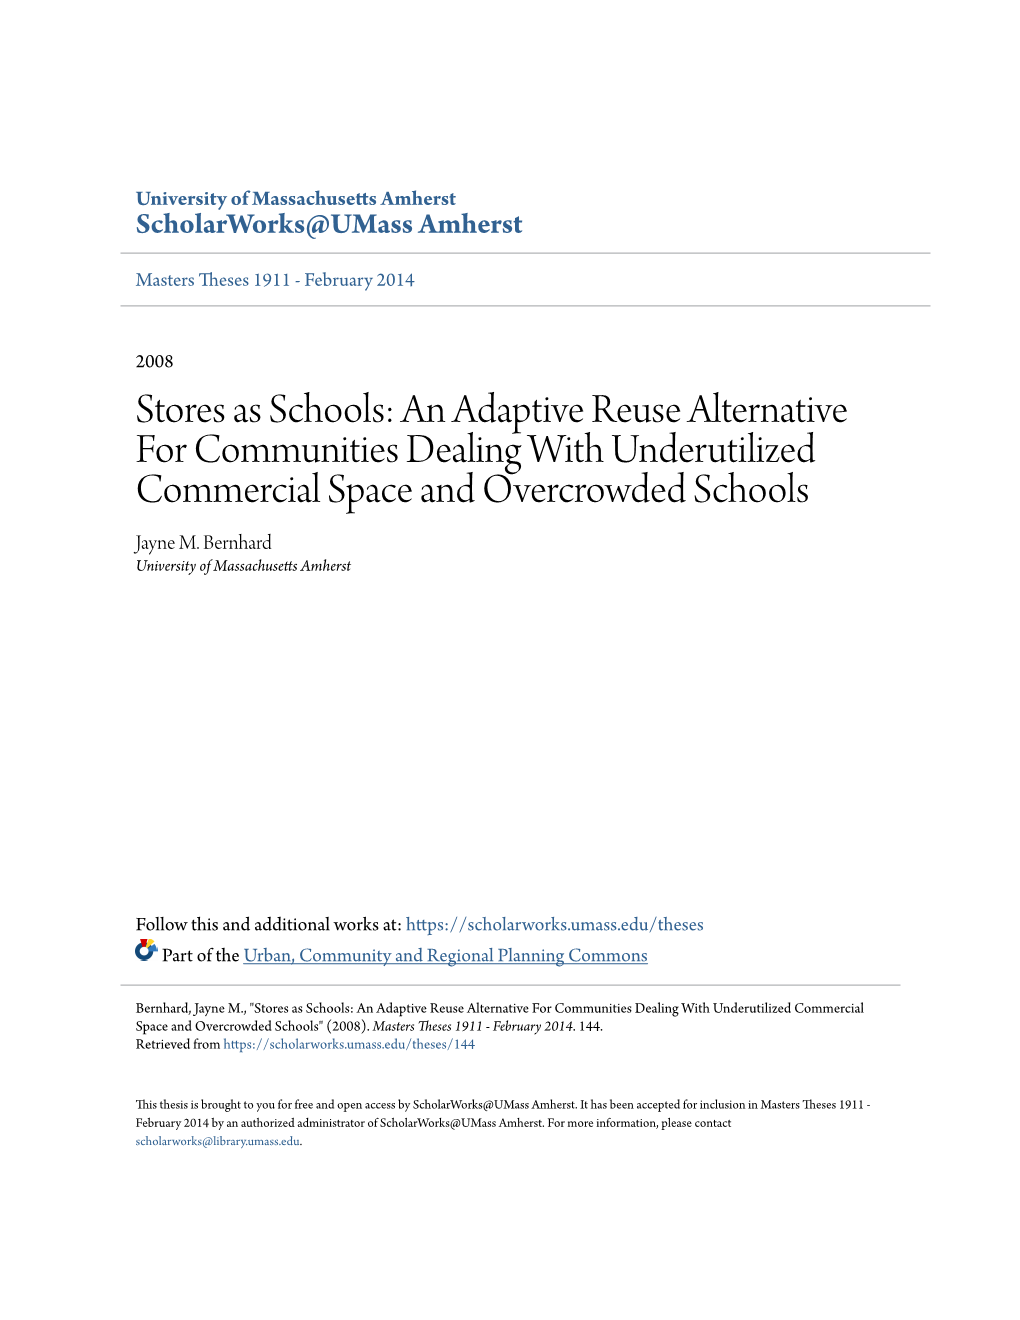 Stores As Schools: an Adaptive Reuse Alternative for Communities Dealing with Underutilized Commercial Space and Overcrowded Schools Jayne M